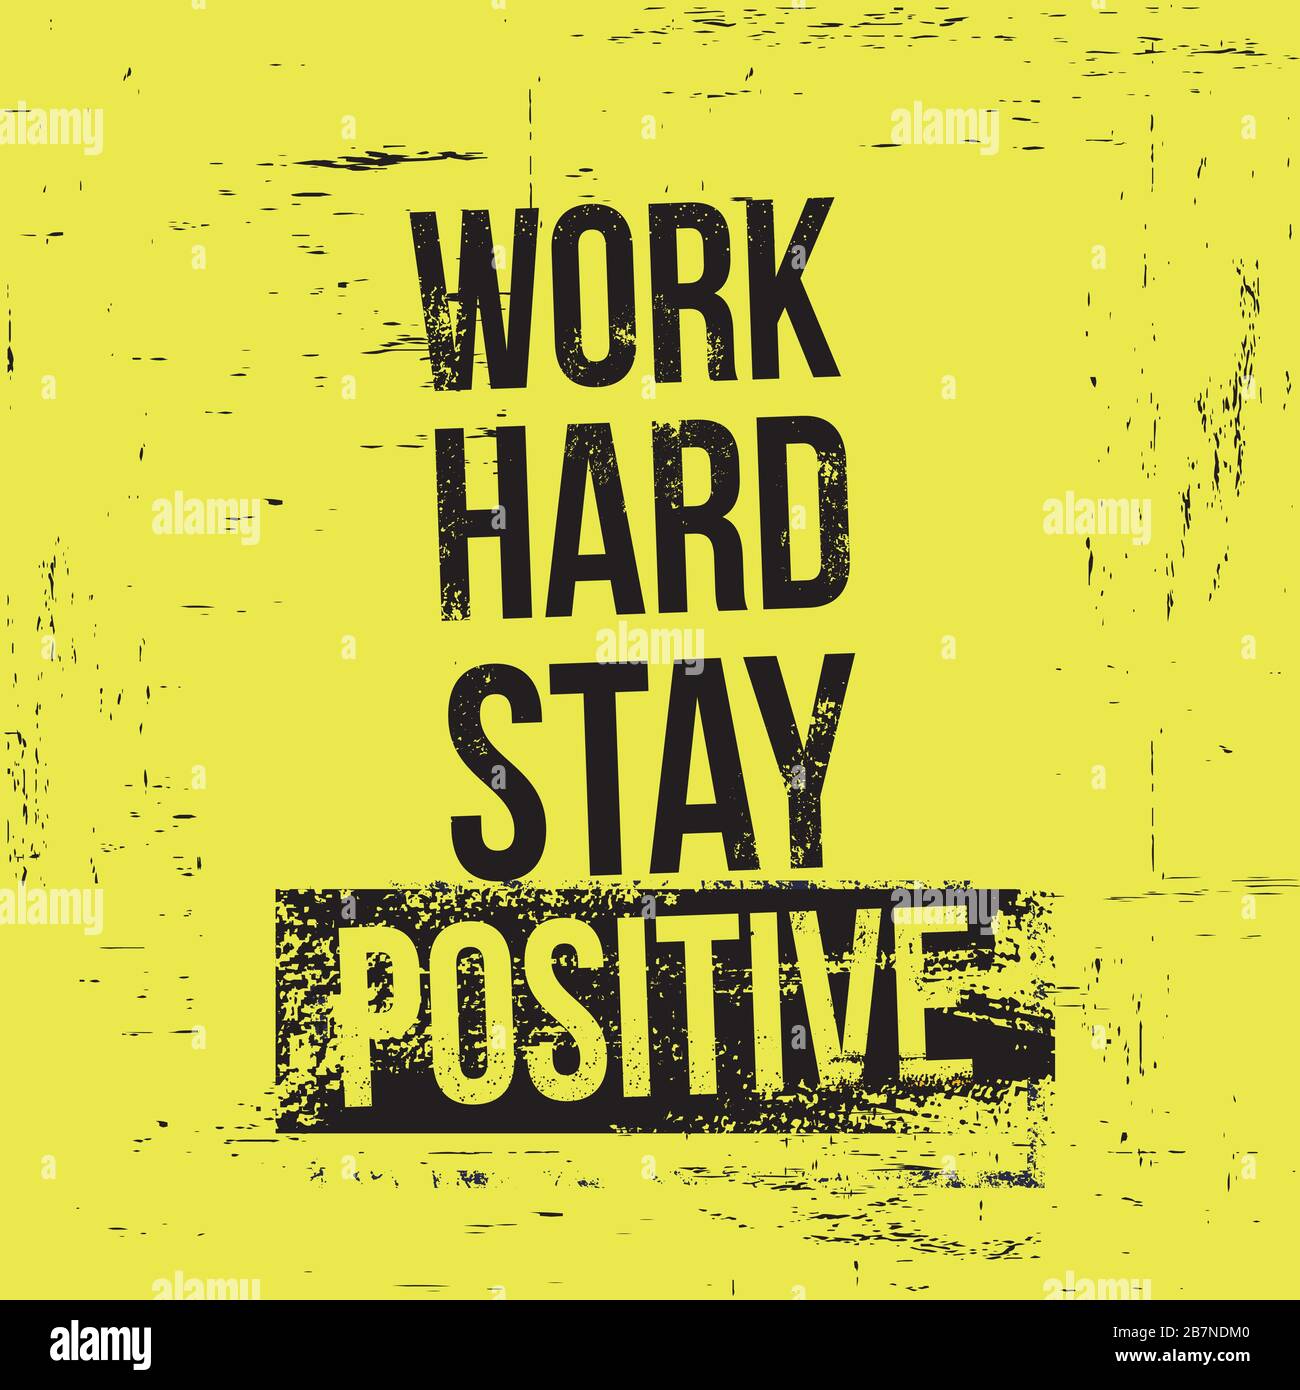 Work hard stay positive. Motivational quotes. Vector illustration ...